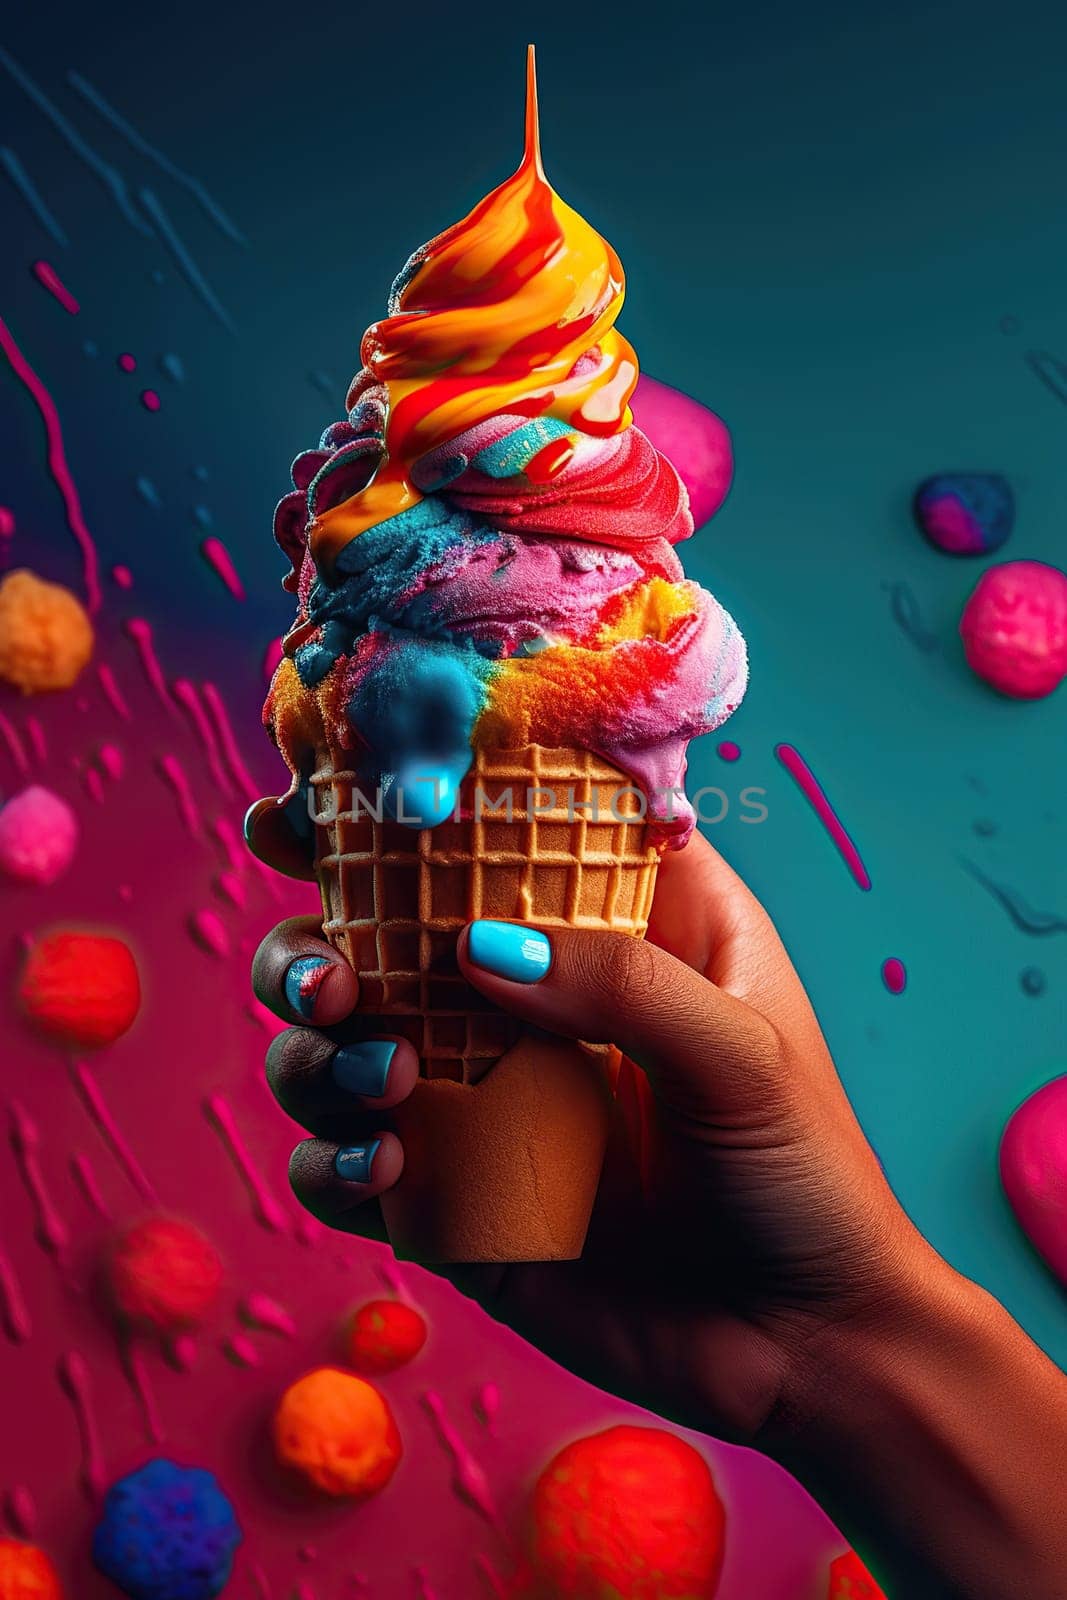 Delicious Sweet Ice Cream With Colorful Topping in hand by tan4ikk1